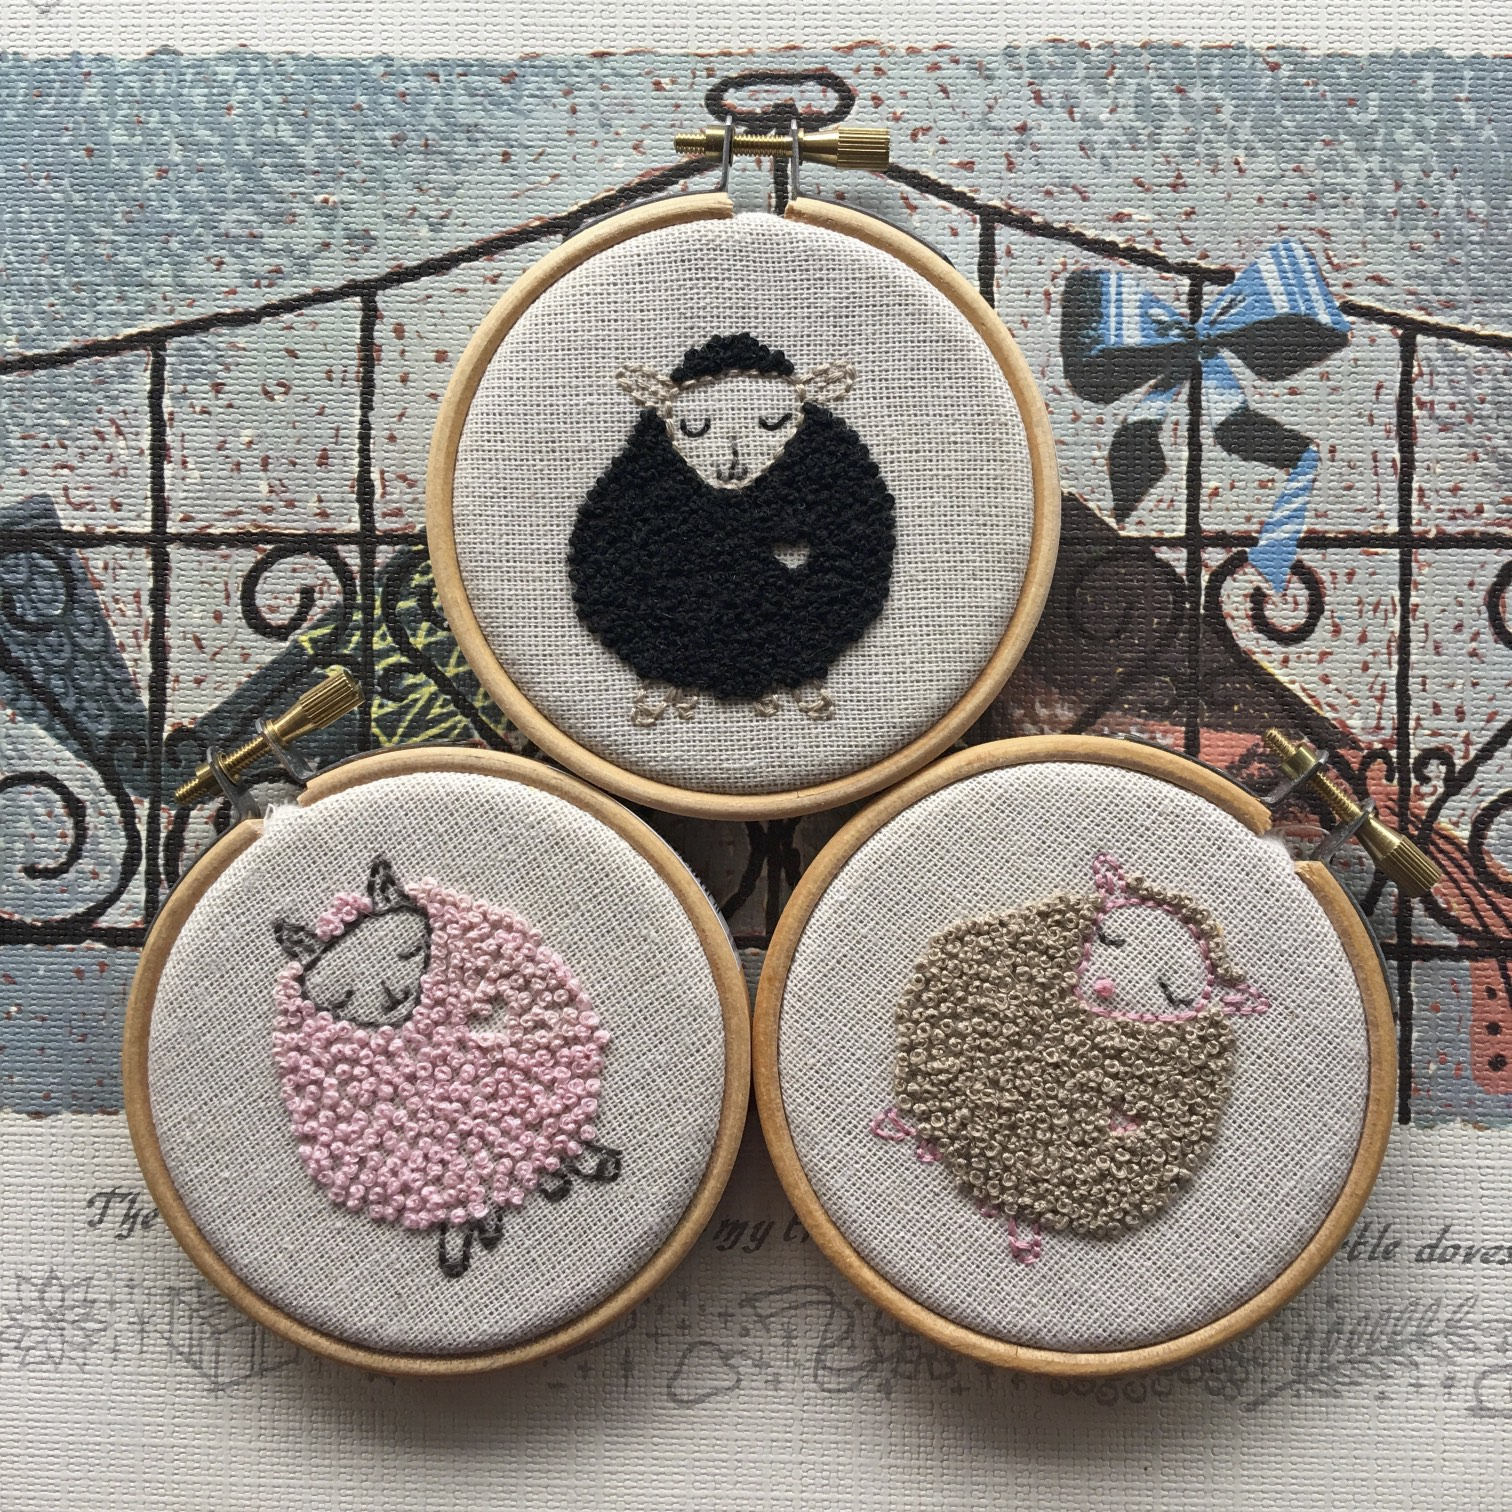 French Knot Embroidery Patterns French Knot Sheep Trio Pattern Instant Pdf Download